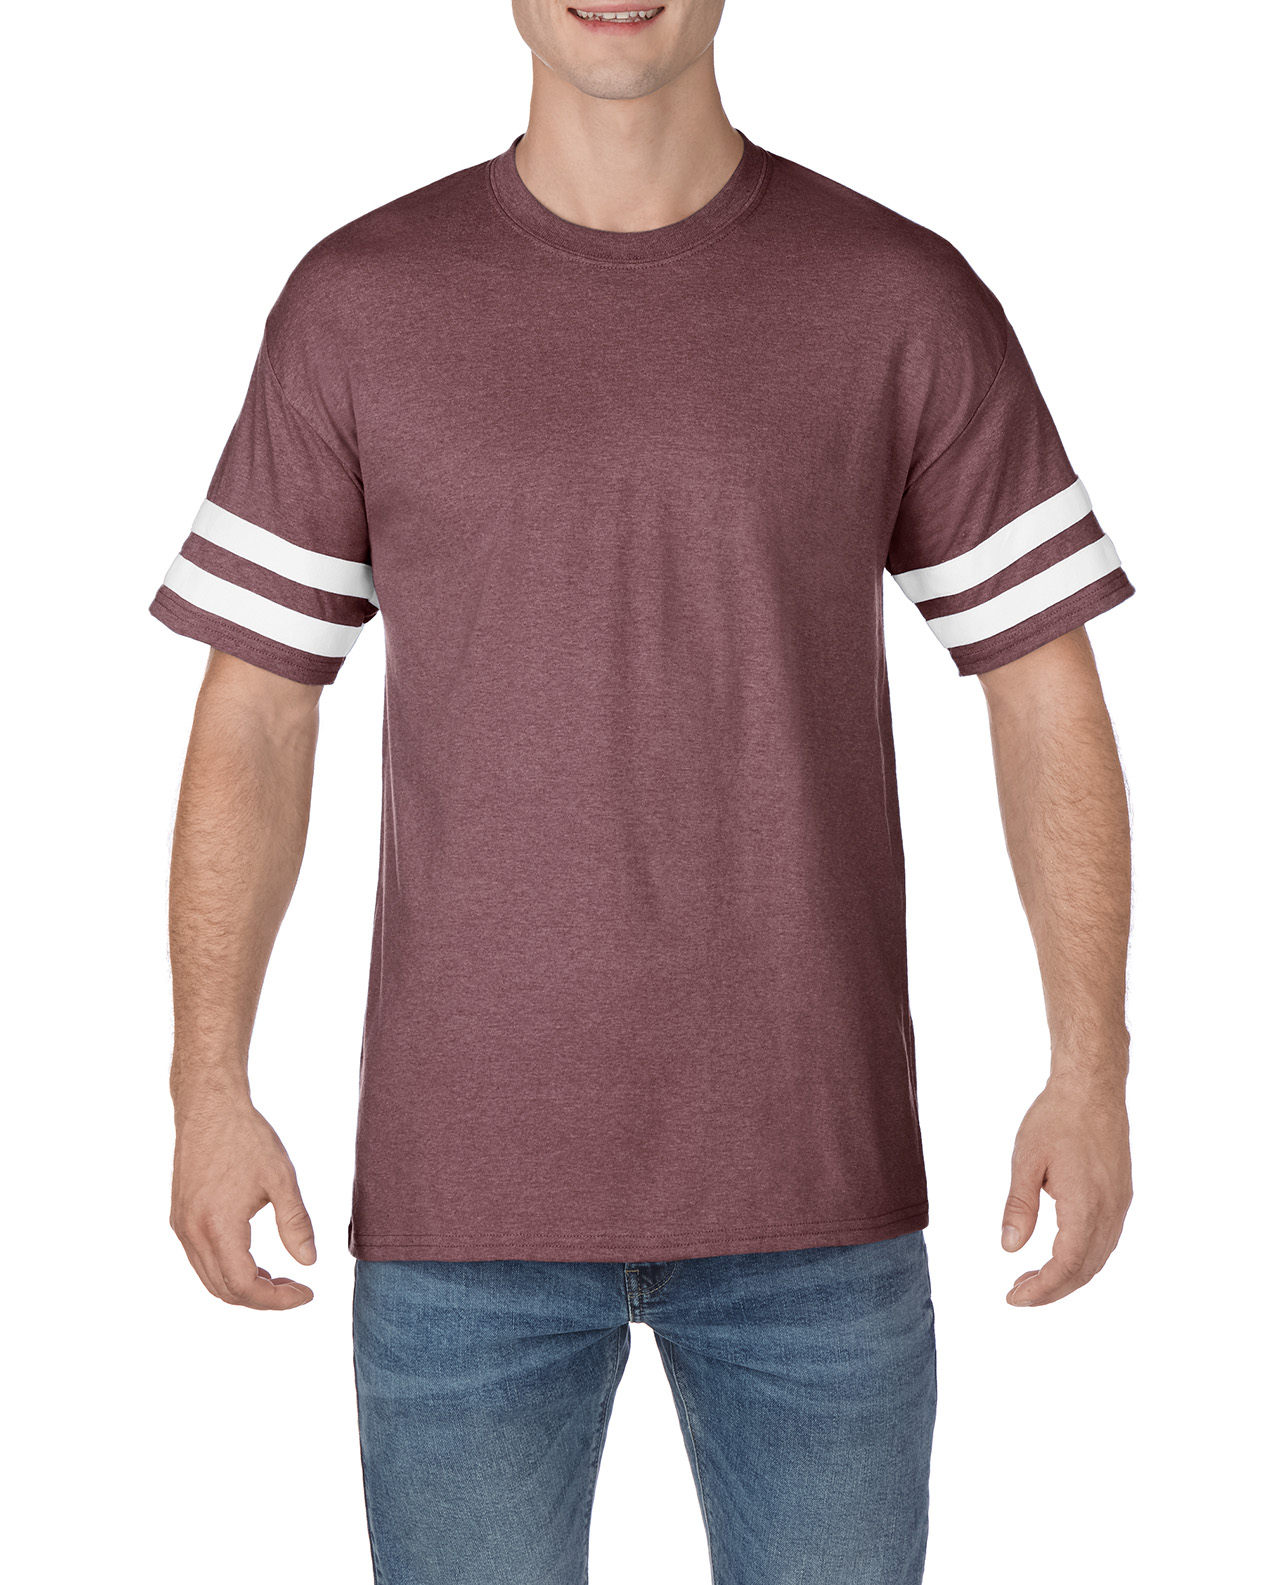 click to view Heather Maroon/ White